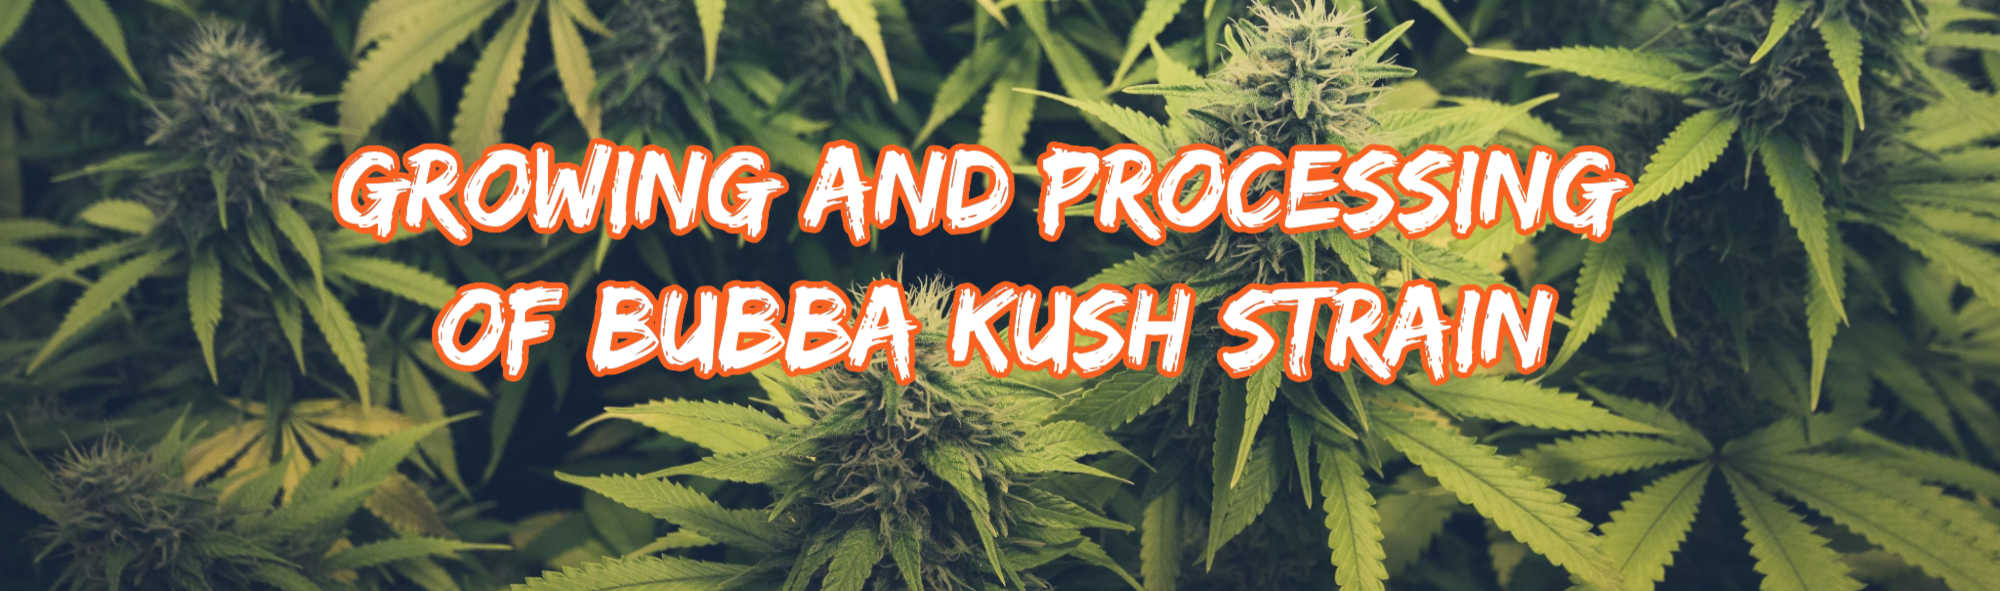 image of growing and processing of bubba kush strain